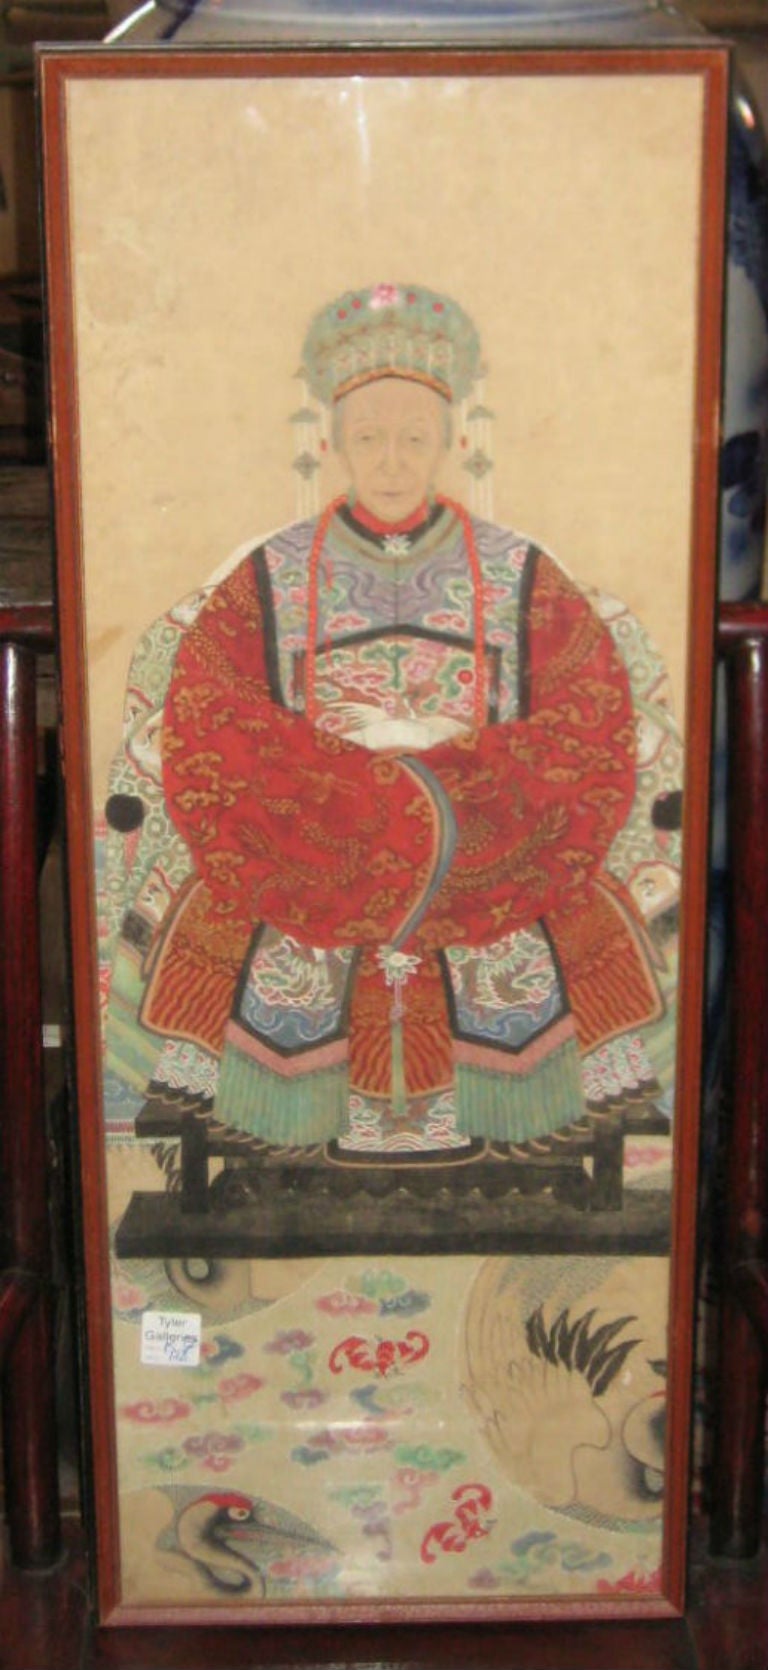 Pair of Early Chinese Emperor & Empress watercolors and ink on paper, each seated and wearing ceremonial robes with 1st rank badges. 

Note: The use of square badges, sewn on the front and back of ceremonial robes of civil and military officers